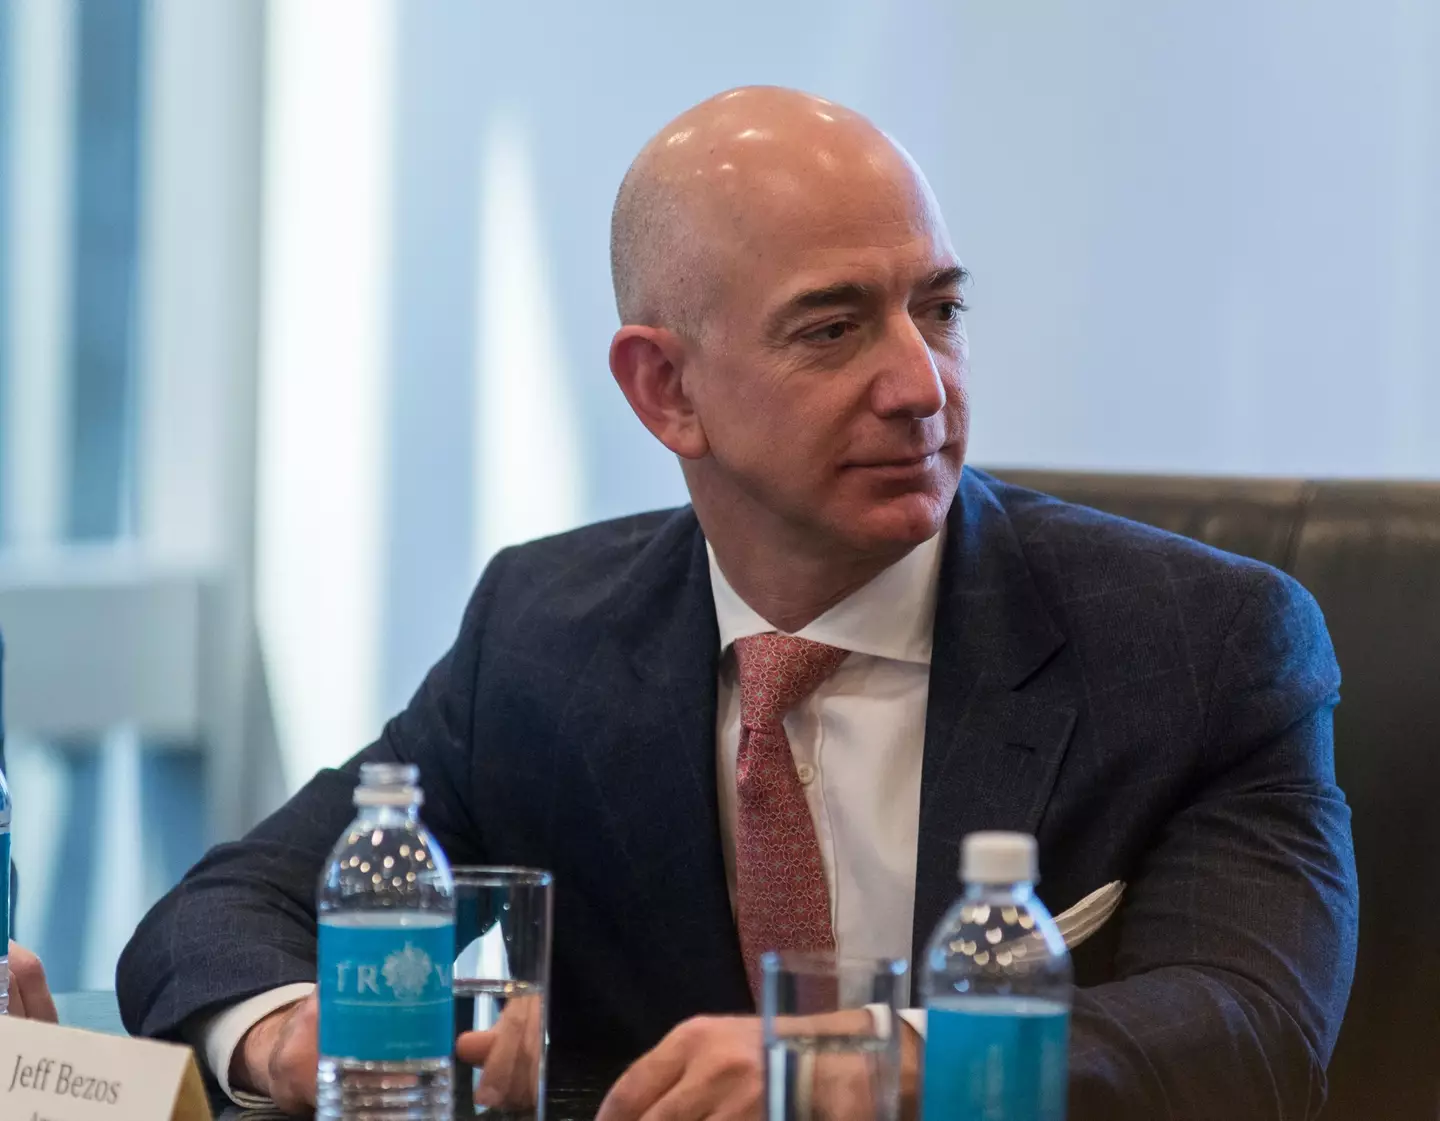 The report shows that the hardest billionaire hit was Amazon CEO Jeff Bezos, credit: MediaPunch Inc/Alamy Live News